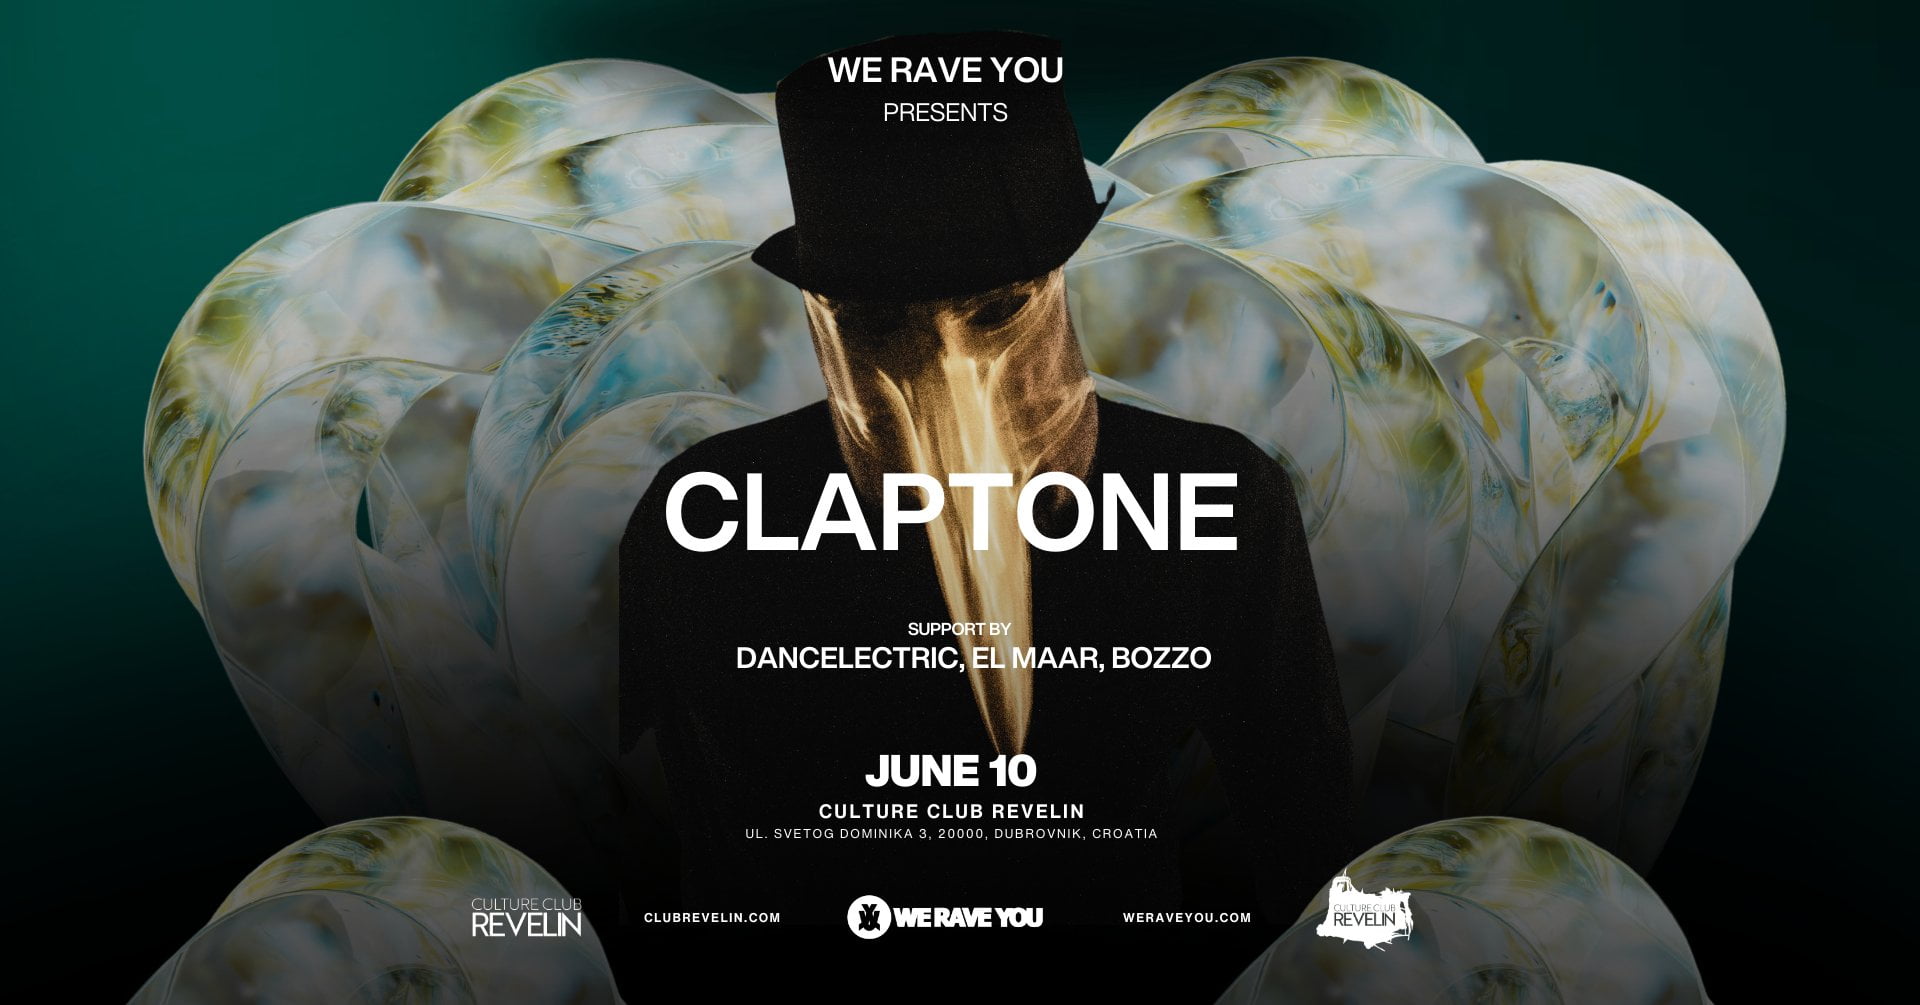 We Rave You brings Claptone to Culture Club Revelin in Croatia on 10 June